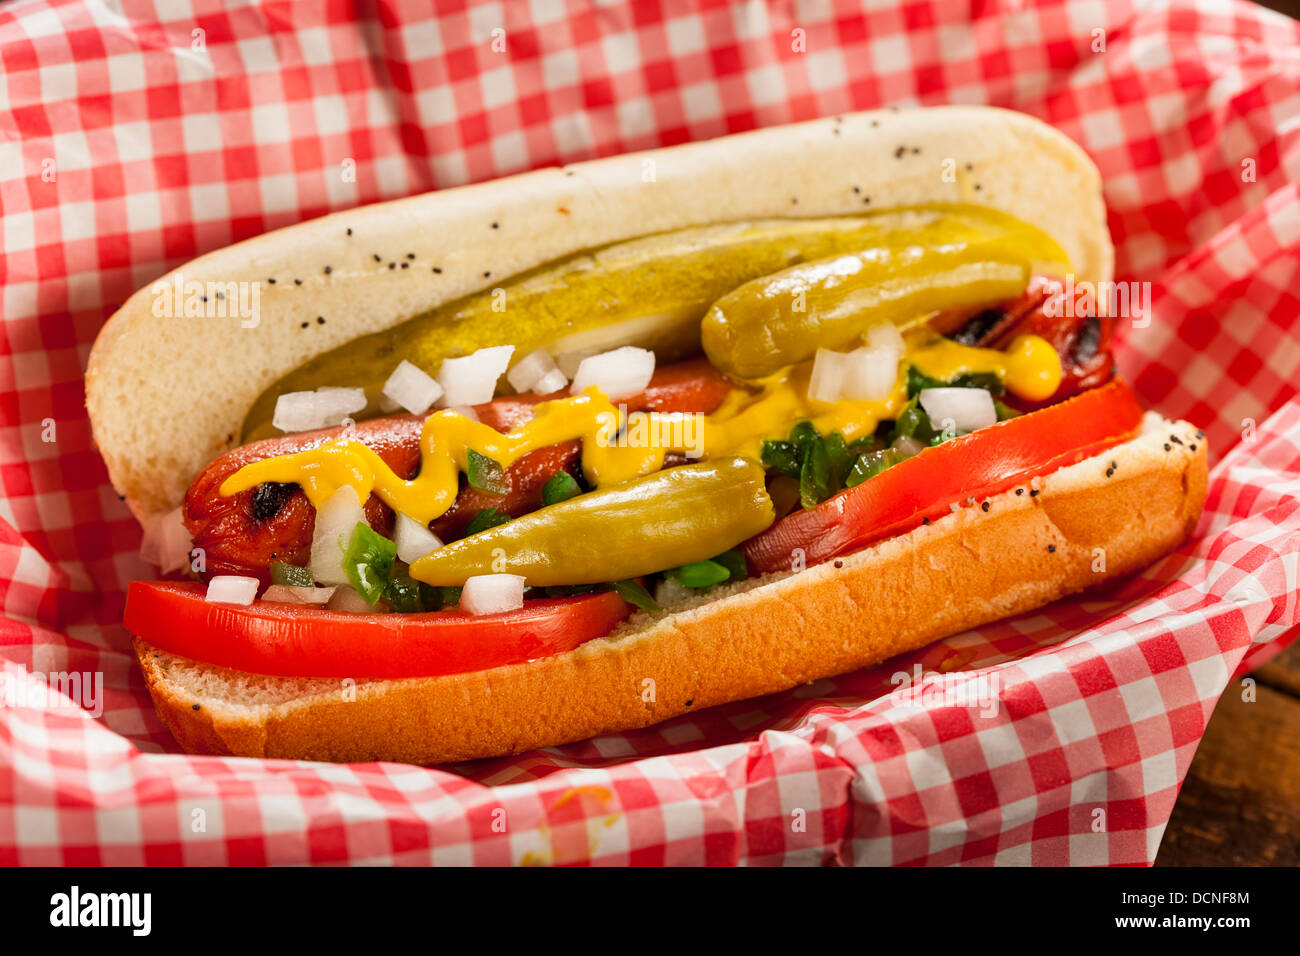 Chicago Style Hot Dog with Mustard, Pickle, Tomato, Relish and Onion Stock Photo